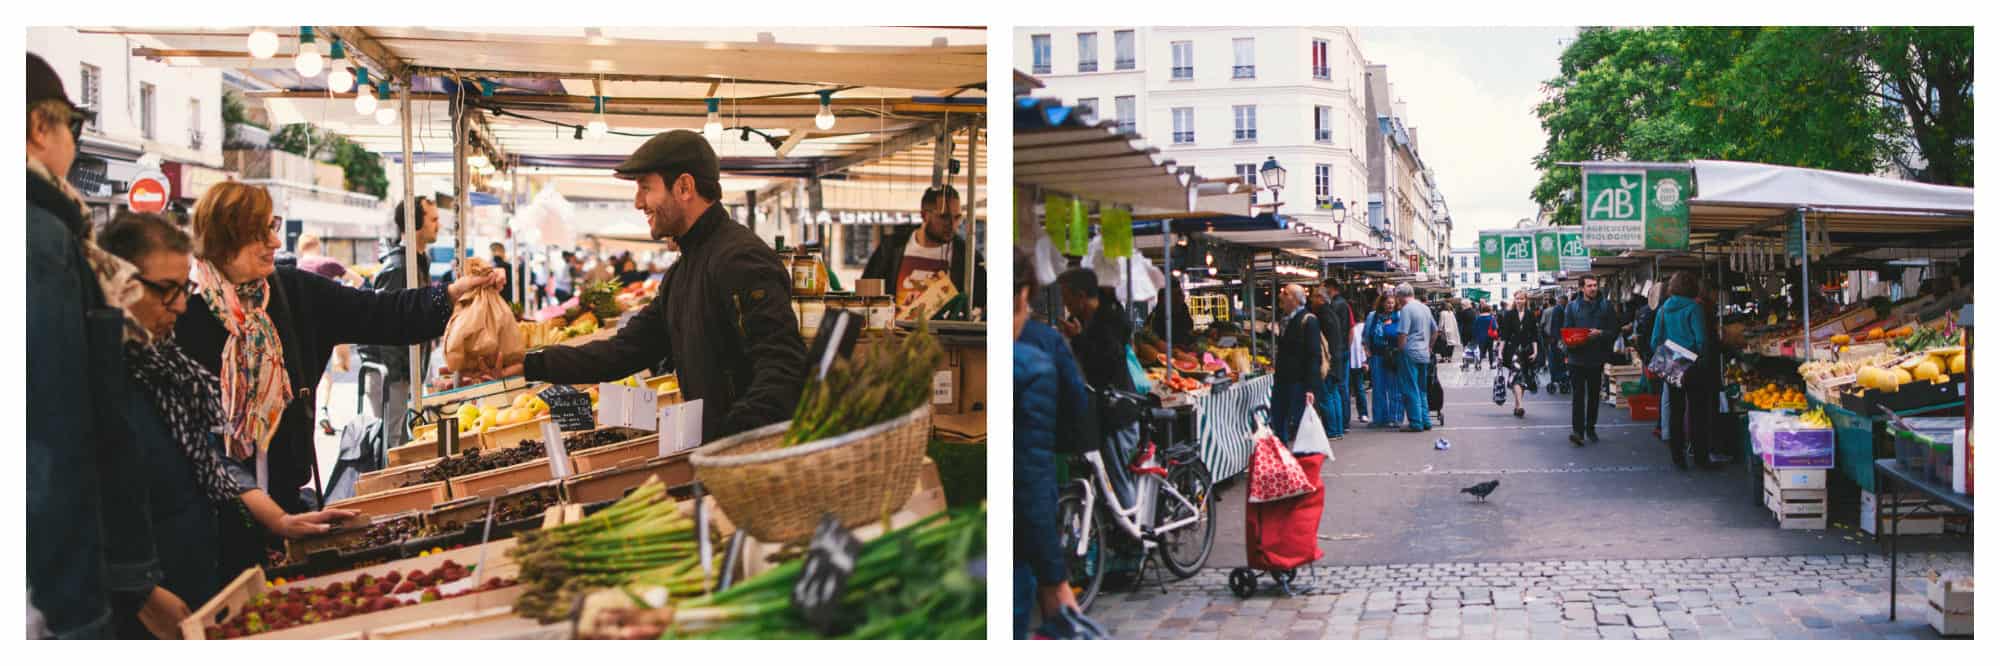 A vegetable stall at the Bastille market in Paris (left). The stalls at the Bastille fruit and vegetable market (right).